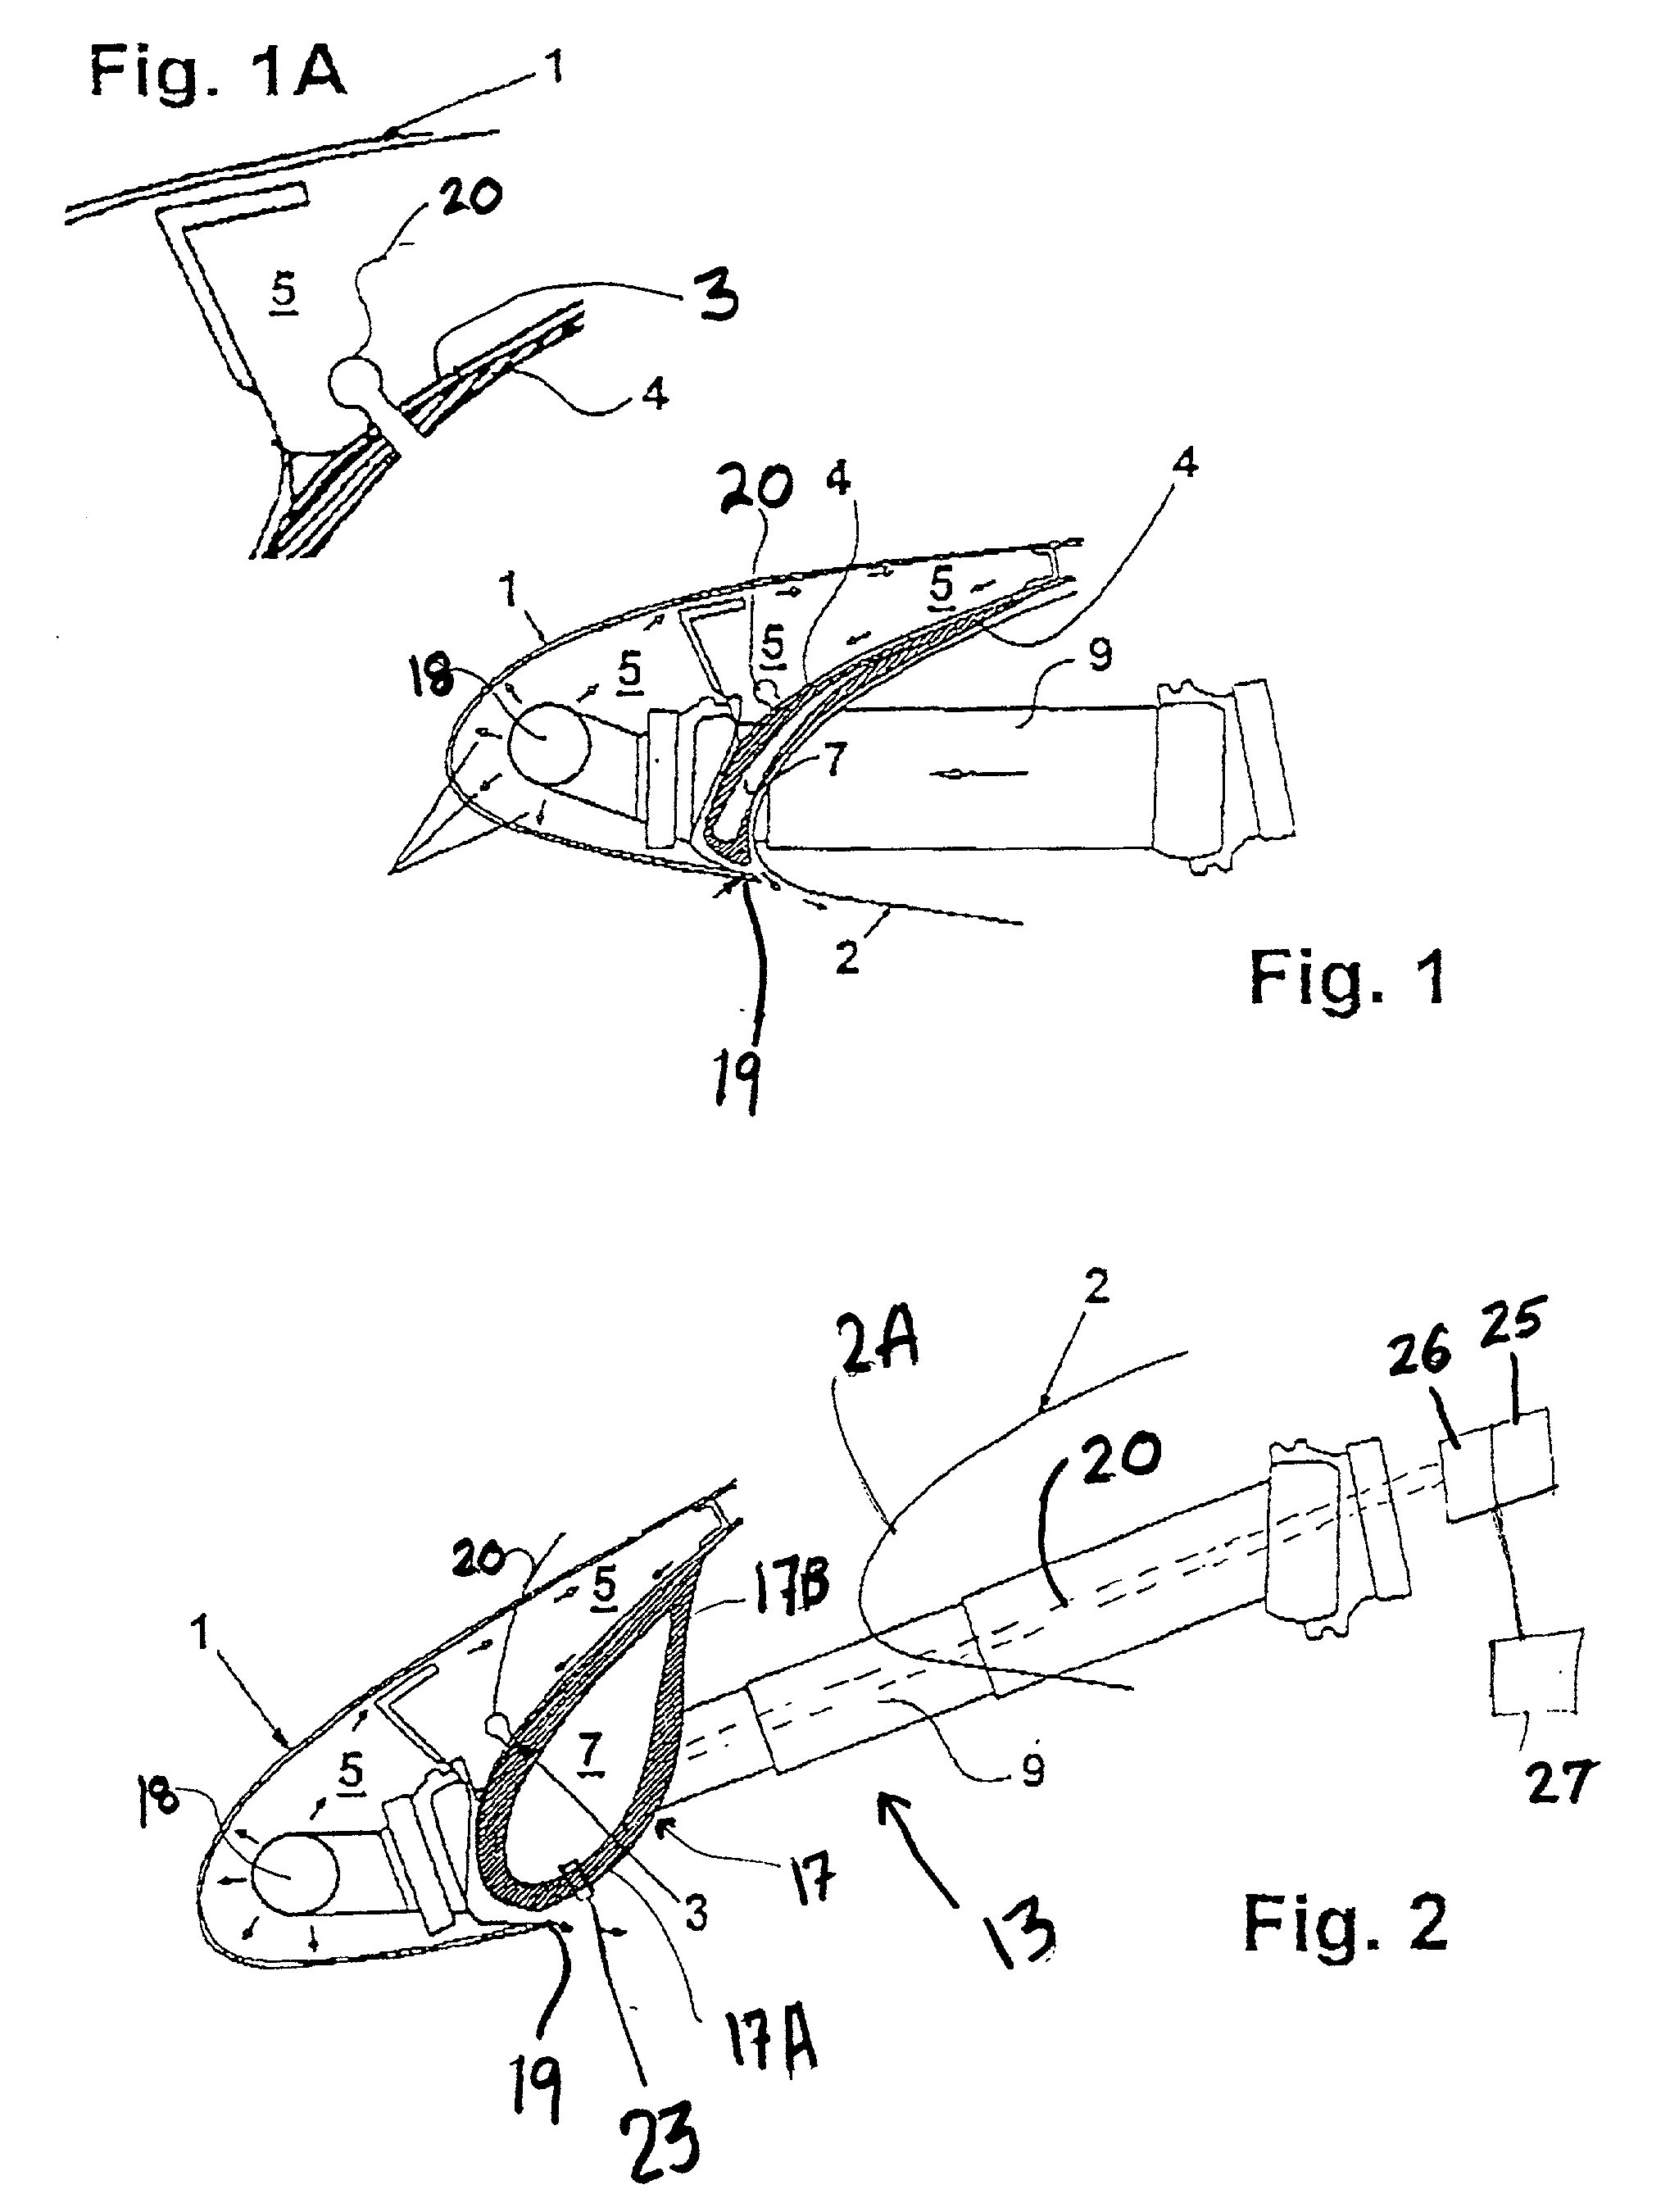 Aerodynamic noise reducing structure for aircraft wing slats